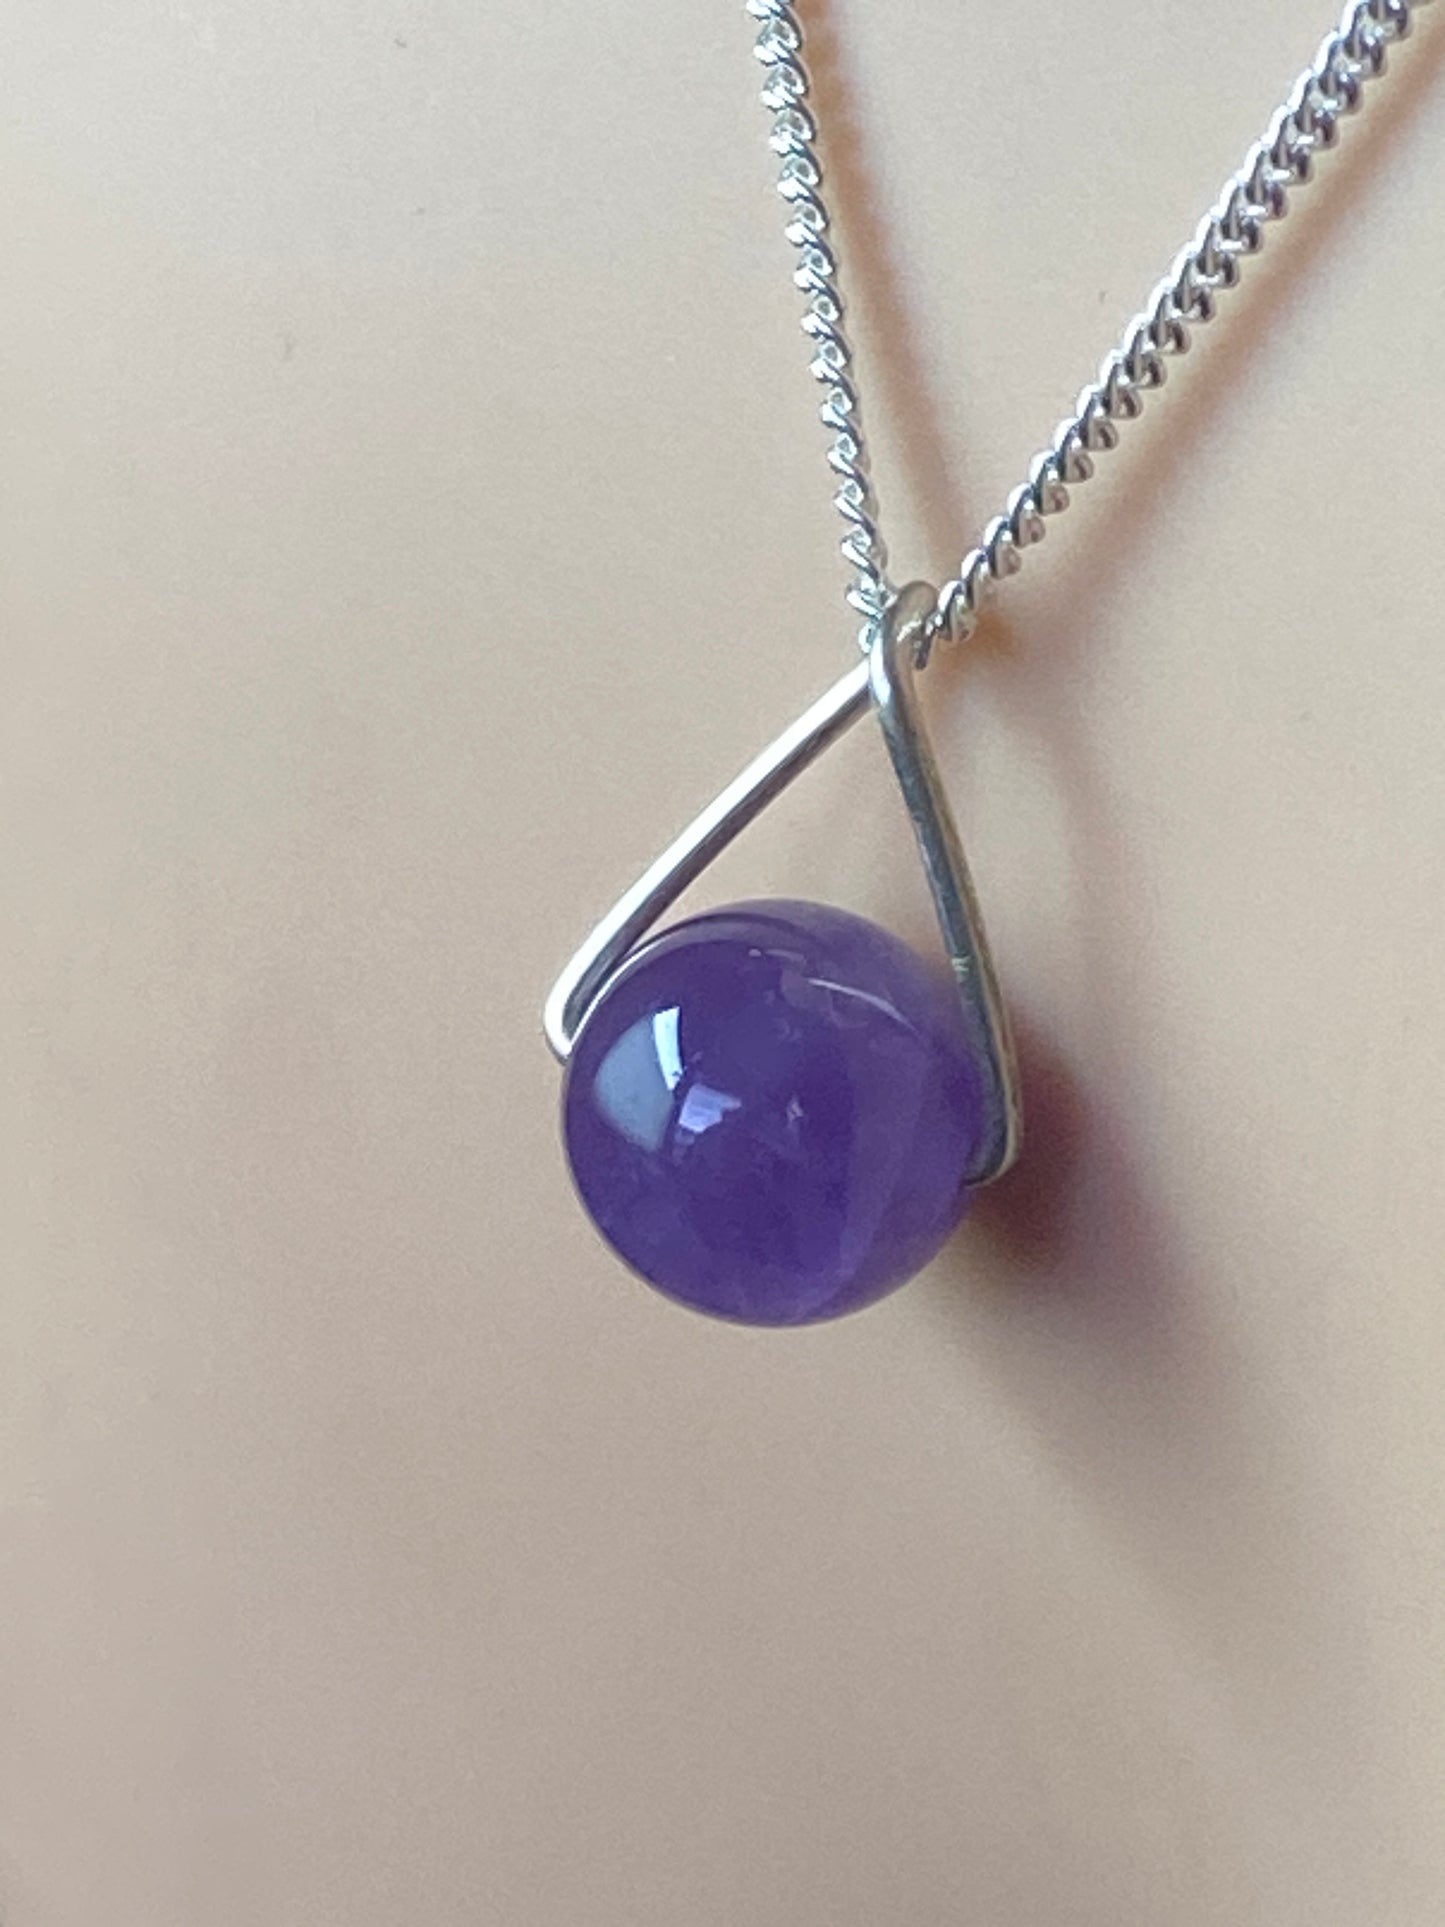 Amethyst necklace, 18” silver chain